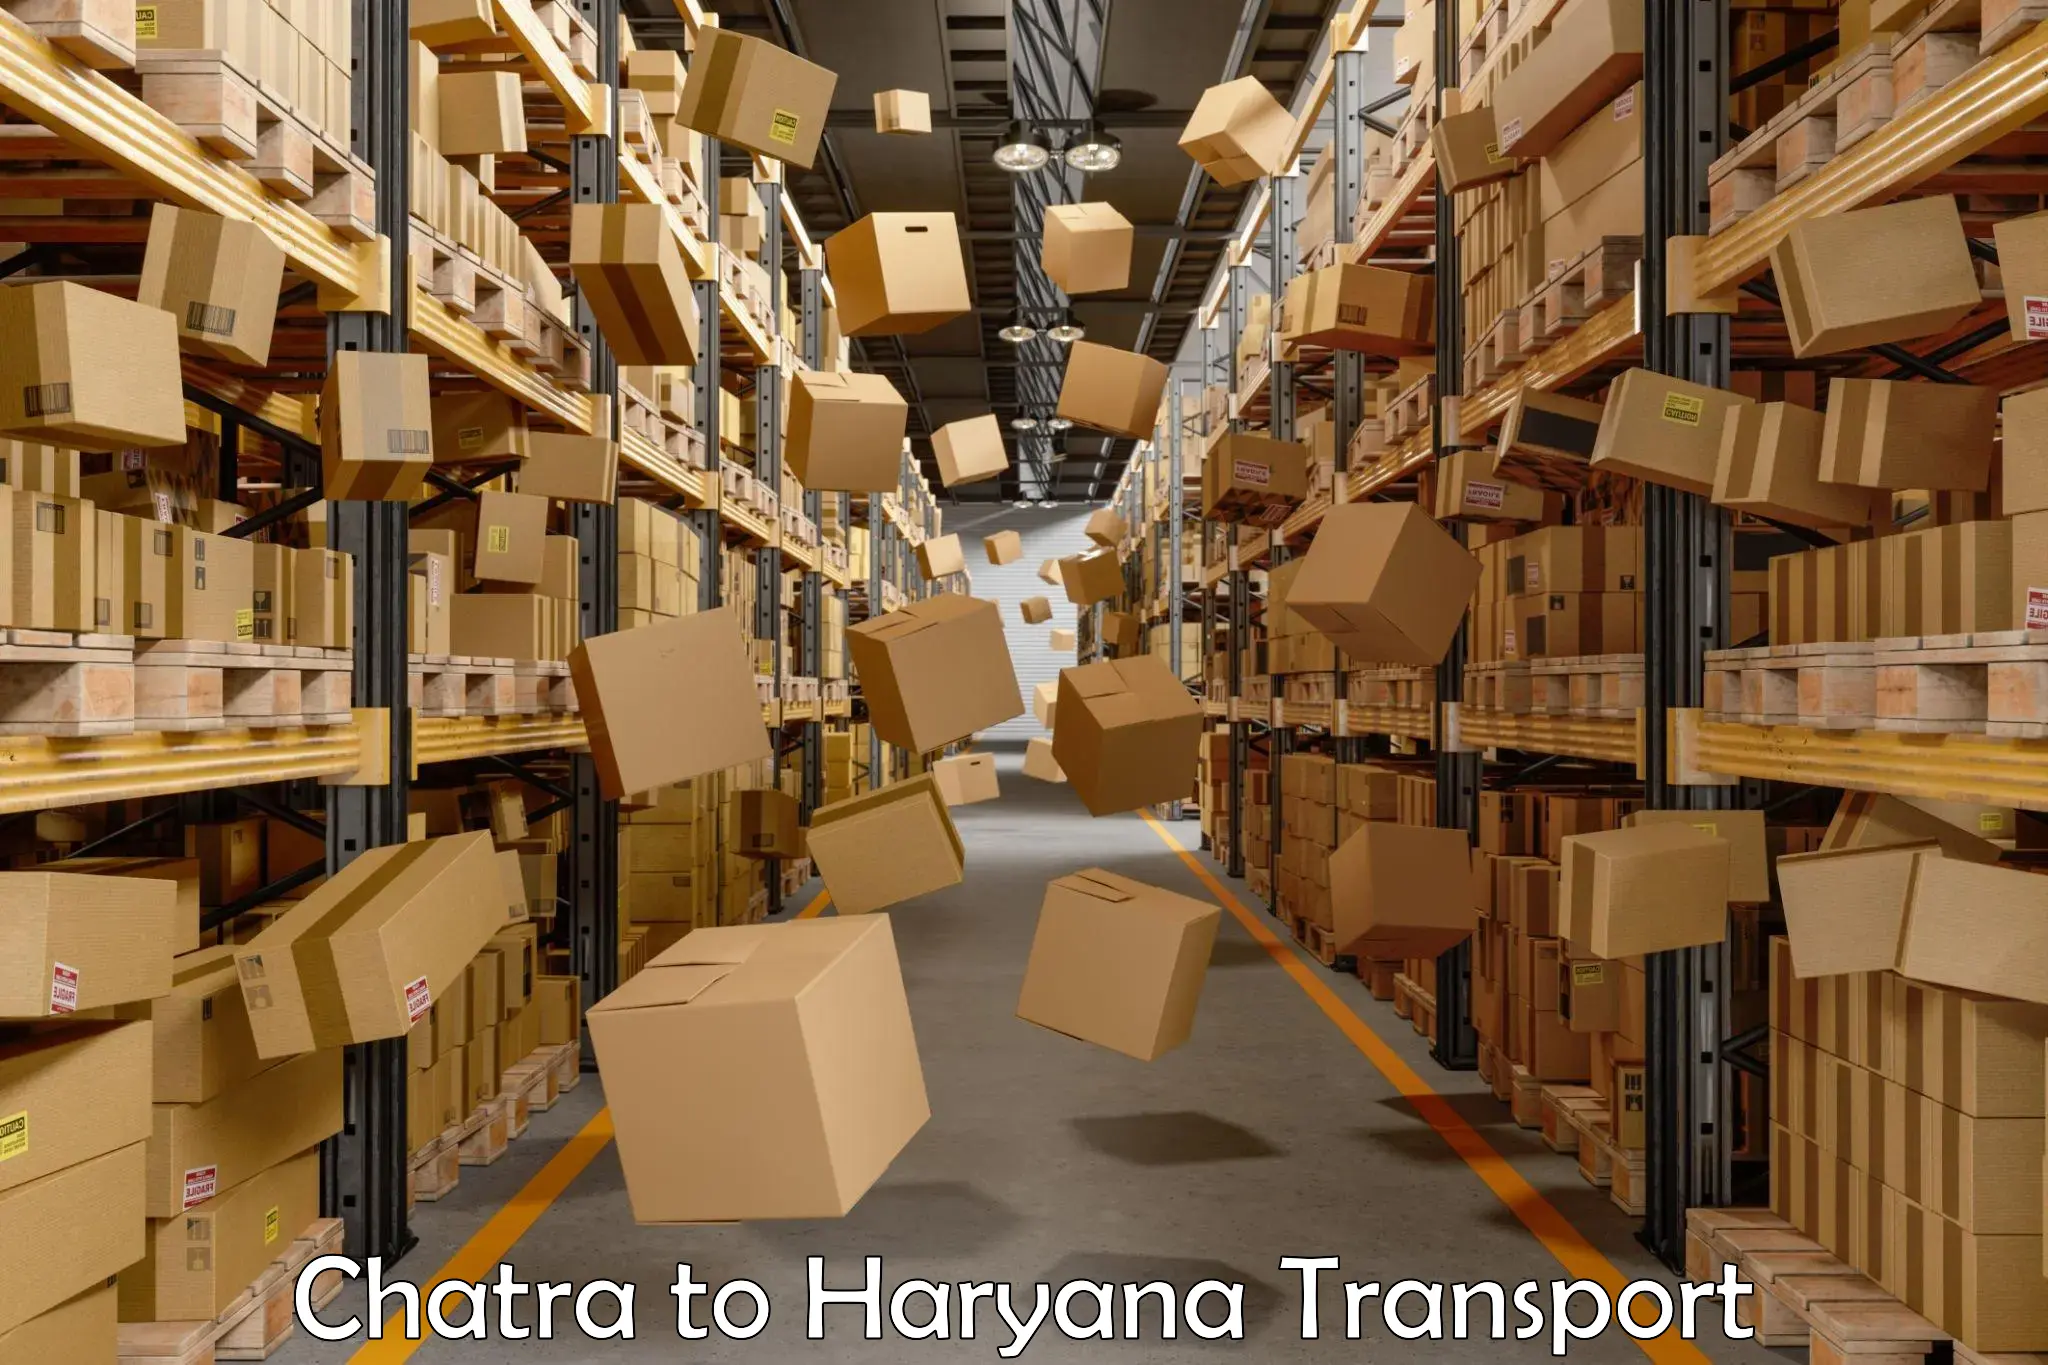 Container transport service Chatra to Gurugram